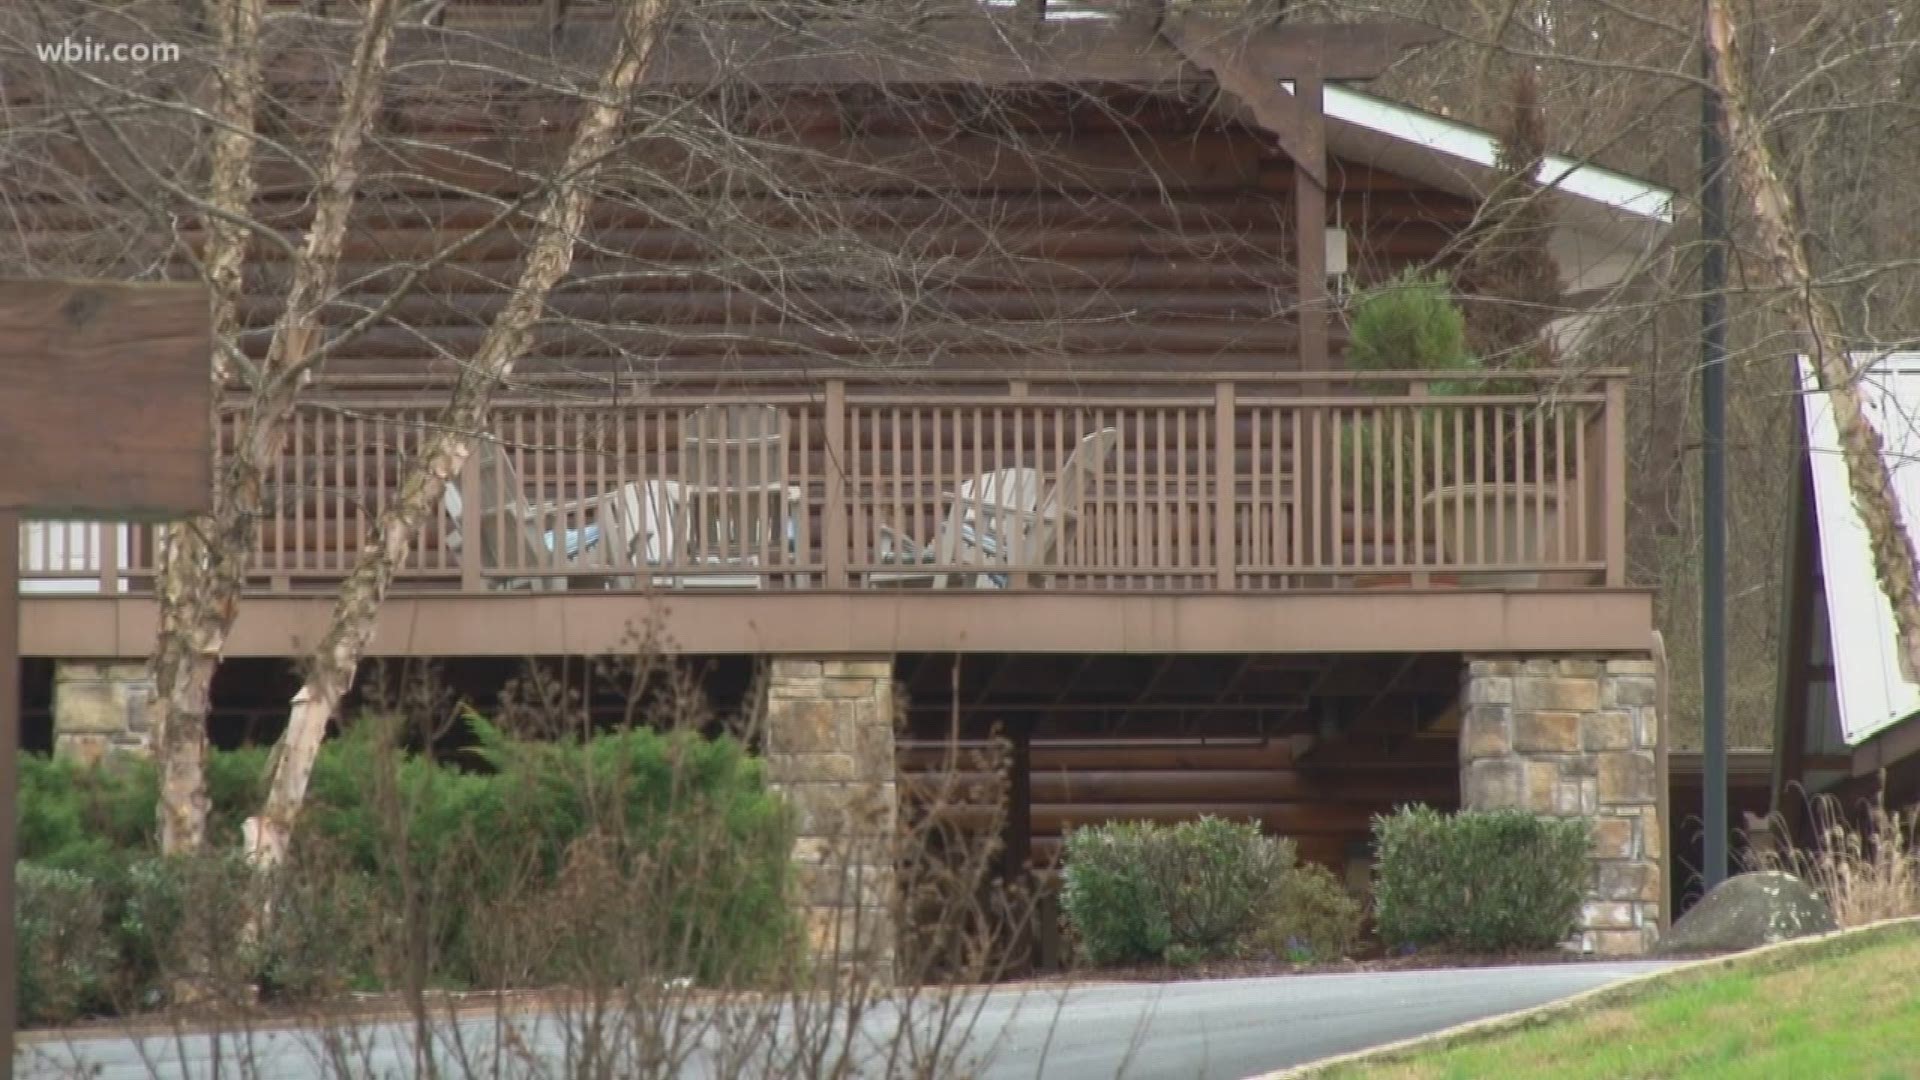 10News is hearing from many former clients of an exclusive women's treatment center after Brookhaven Retreat abruptly shut down last week in Seymour.